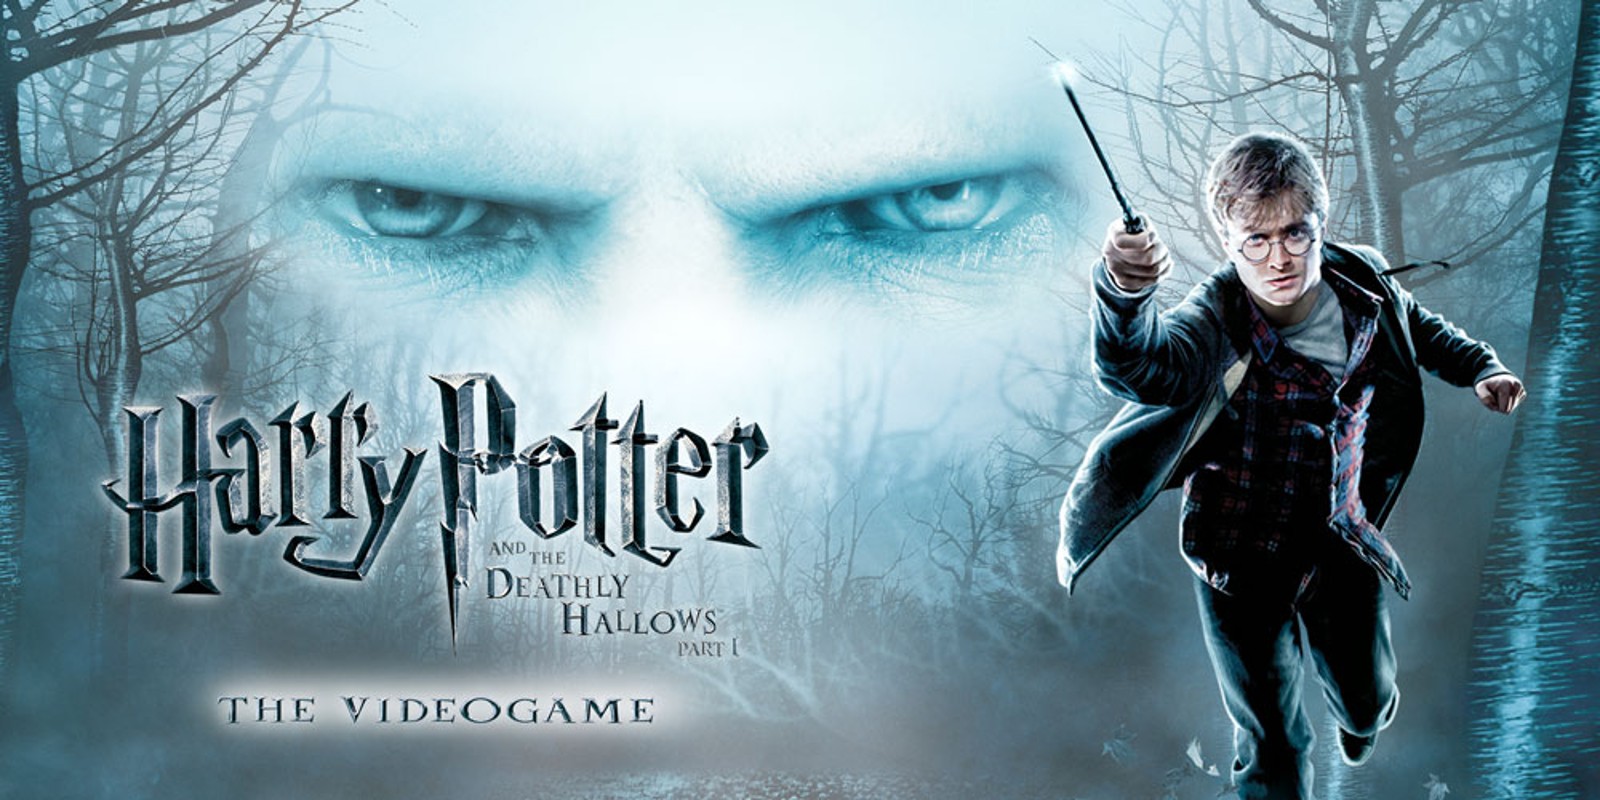 Harry Potter and the Deathly Hallows™ - Part 1: The videogame